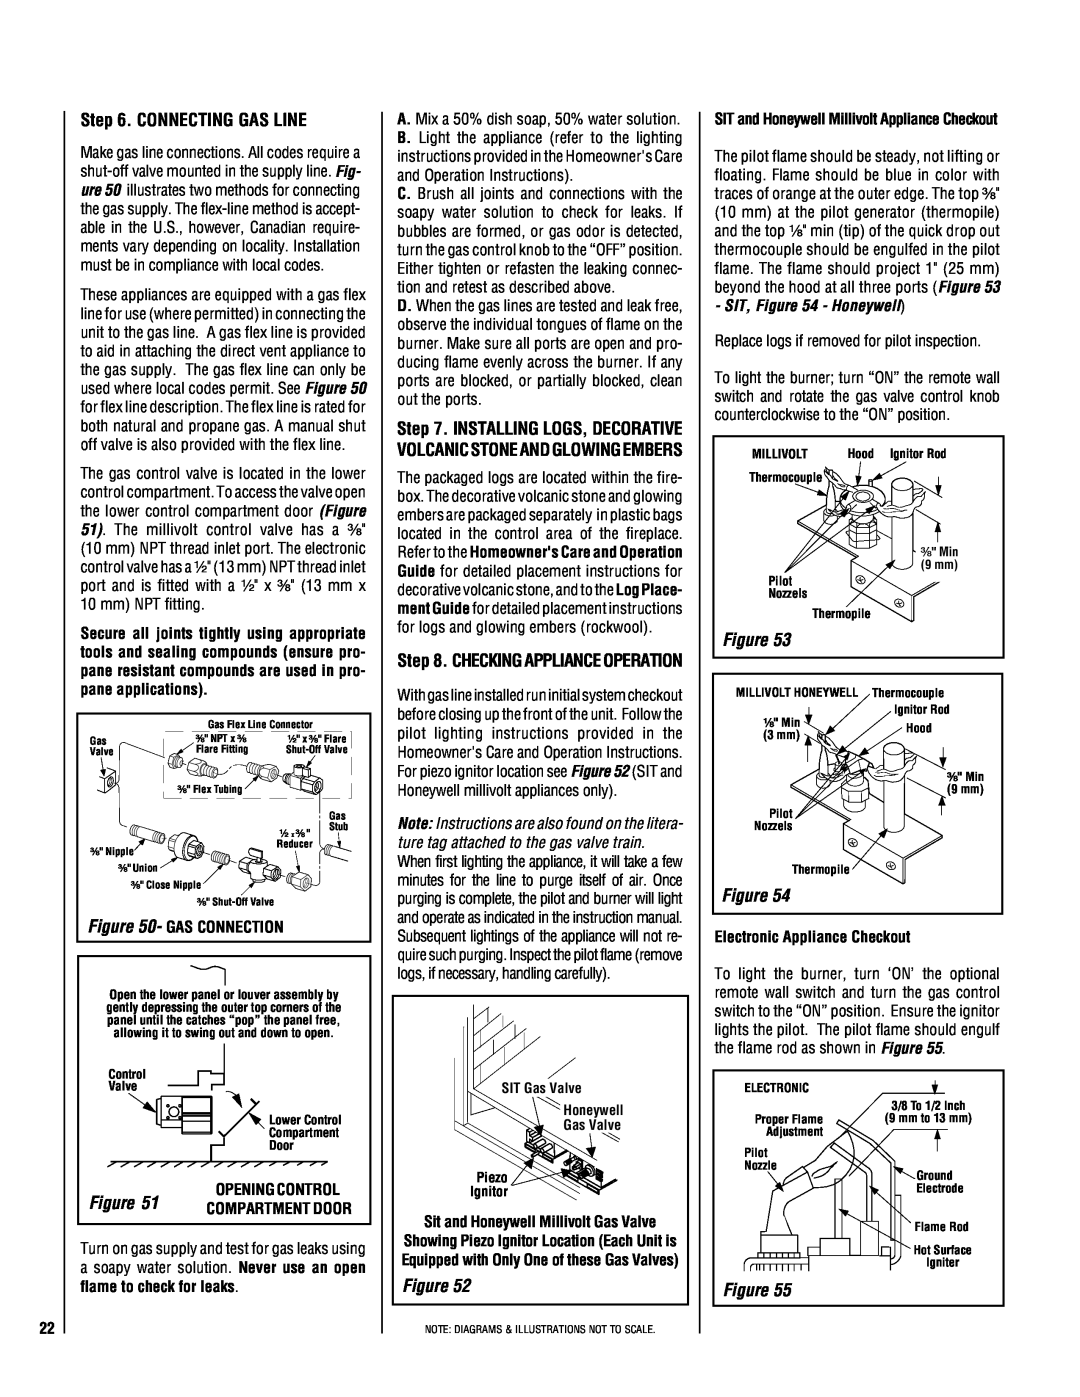 TOA Electronics 600 installation instructions Connecting Gas Line, flame to check for leaks, Checking Appliance Operation 